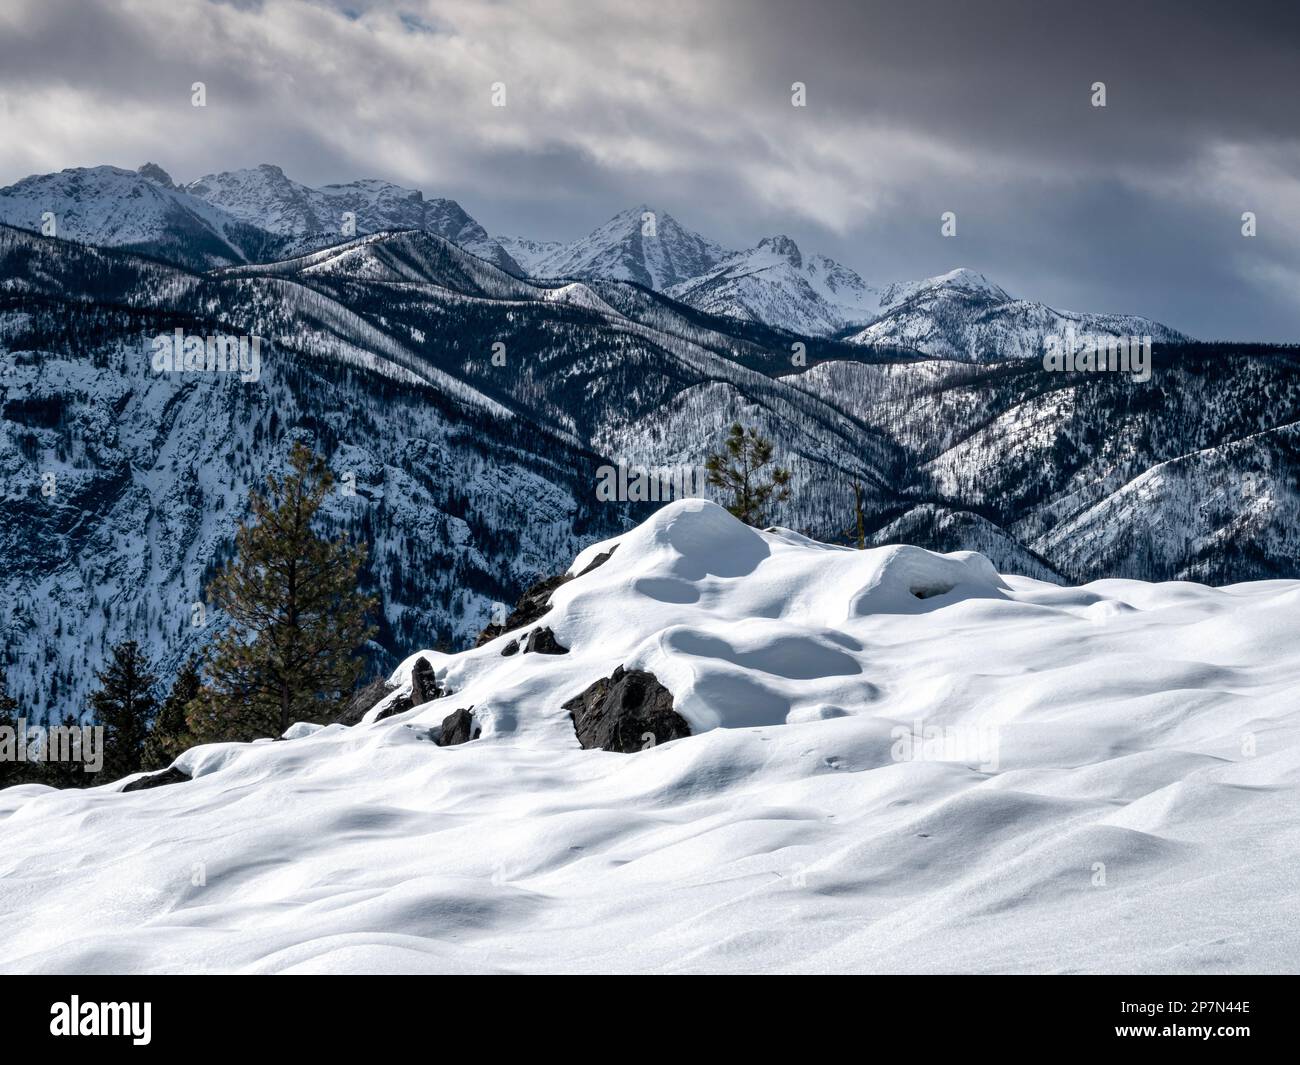 WA23239-00...WASHINGTON - View of the mountains of the North Cascades from the Cassal Hut Trail in the Rendezvous area of the Methow Valley Trails. Stock Photo